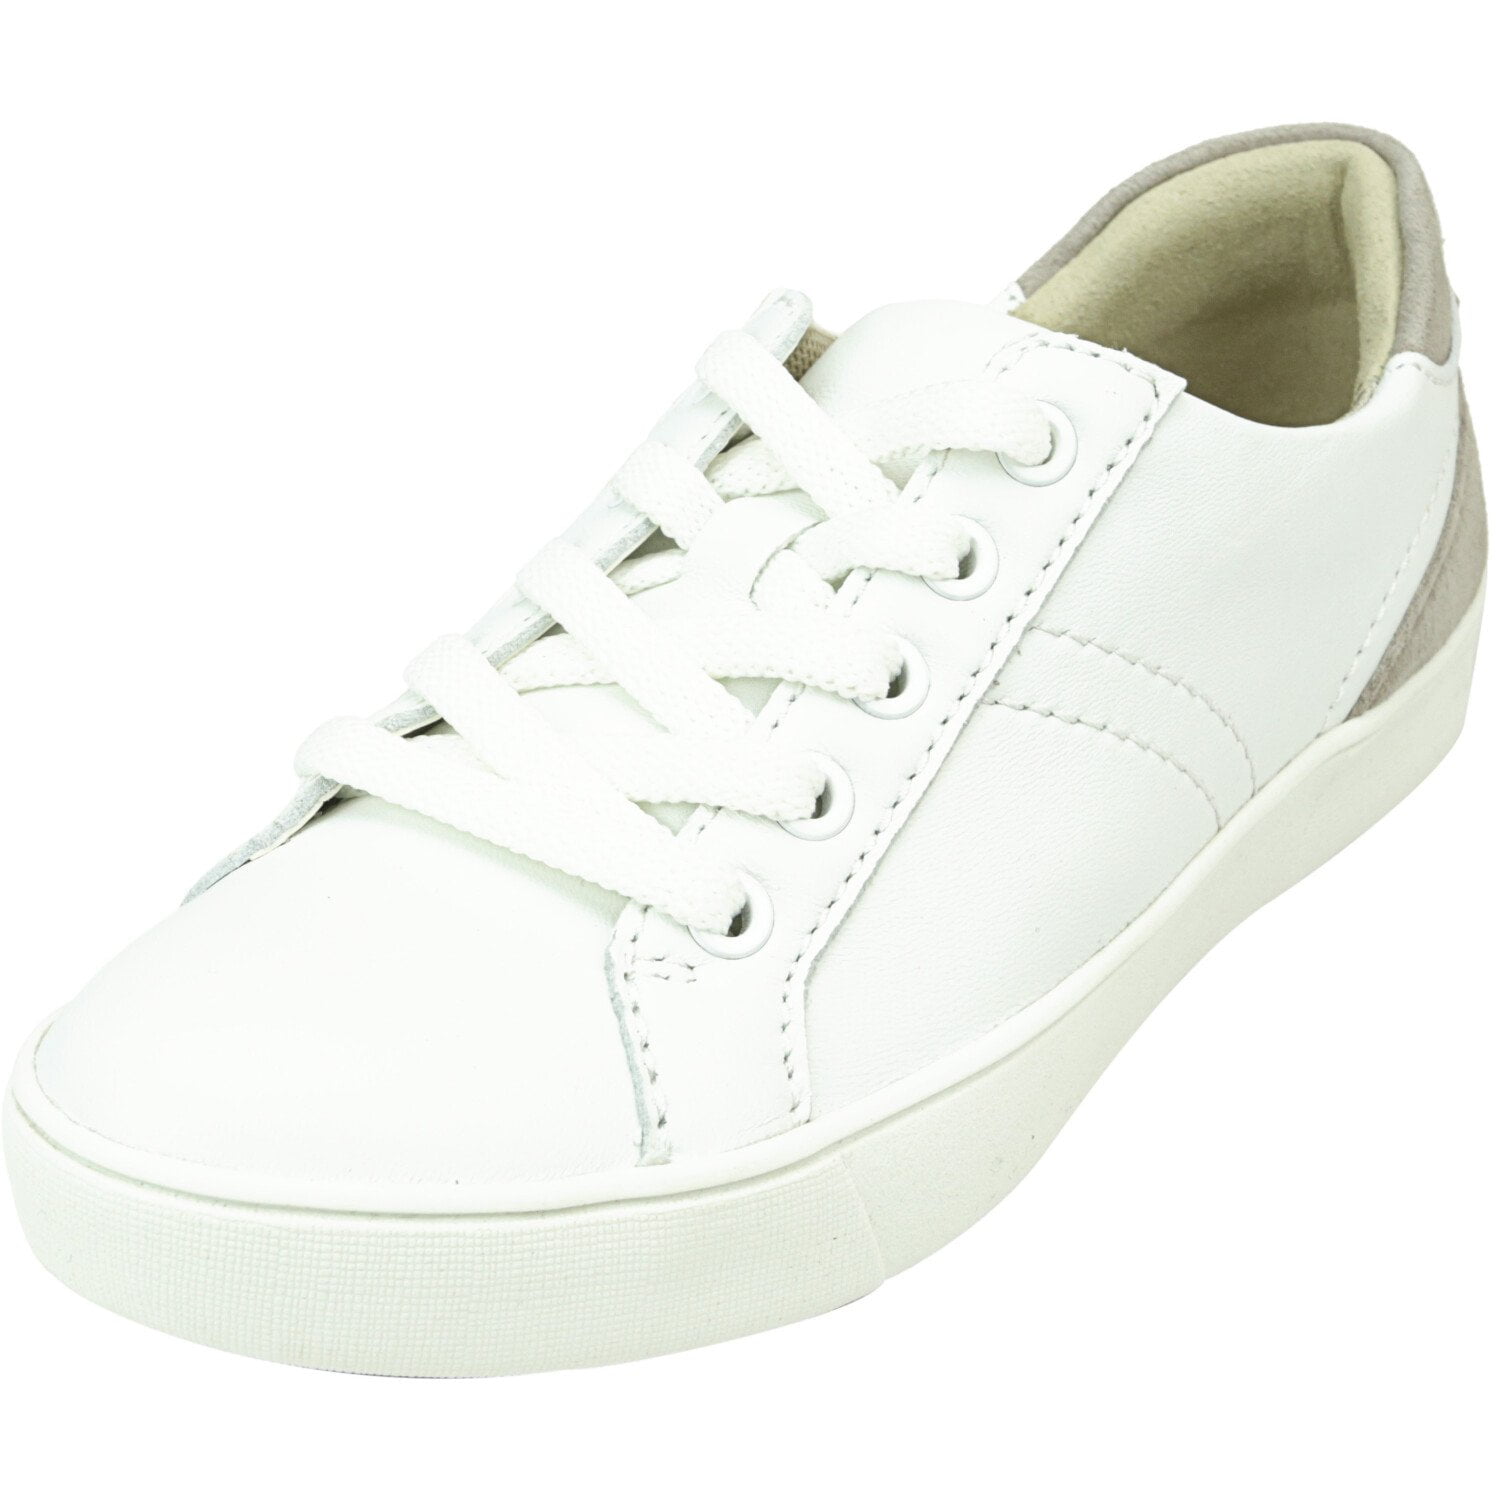 naturalizer white tennis shoes